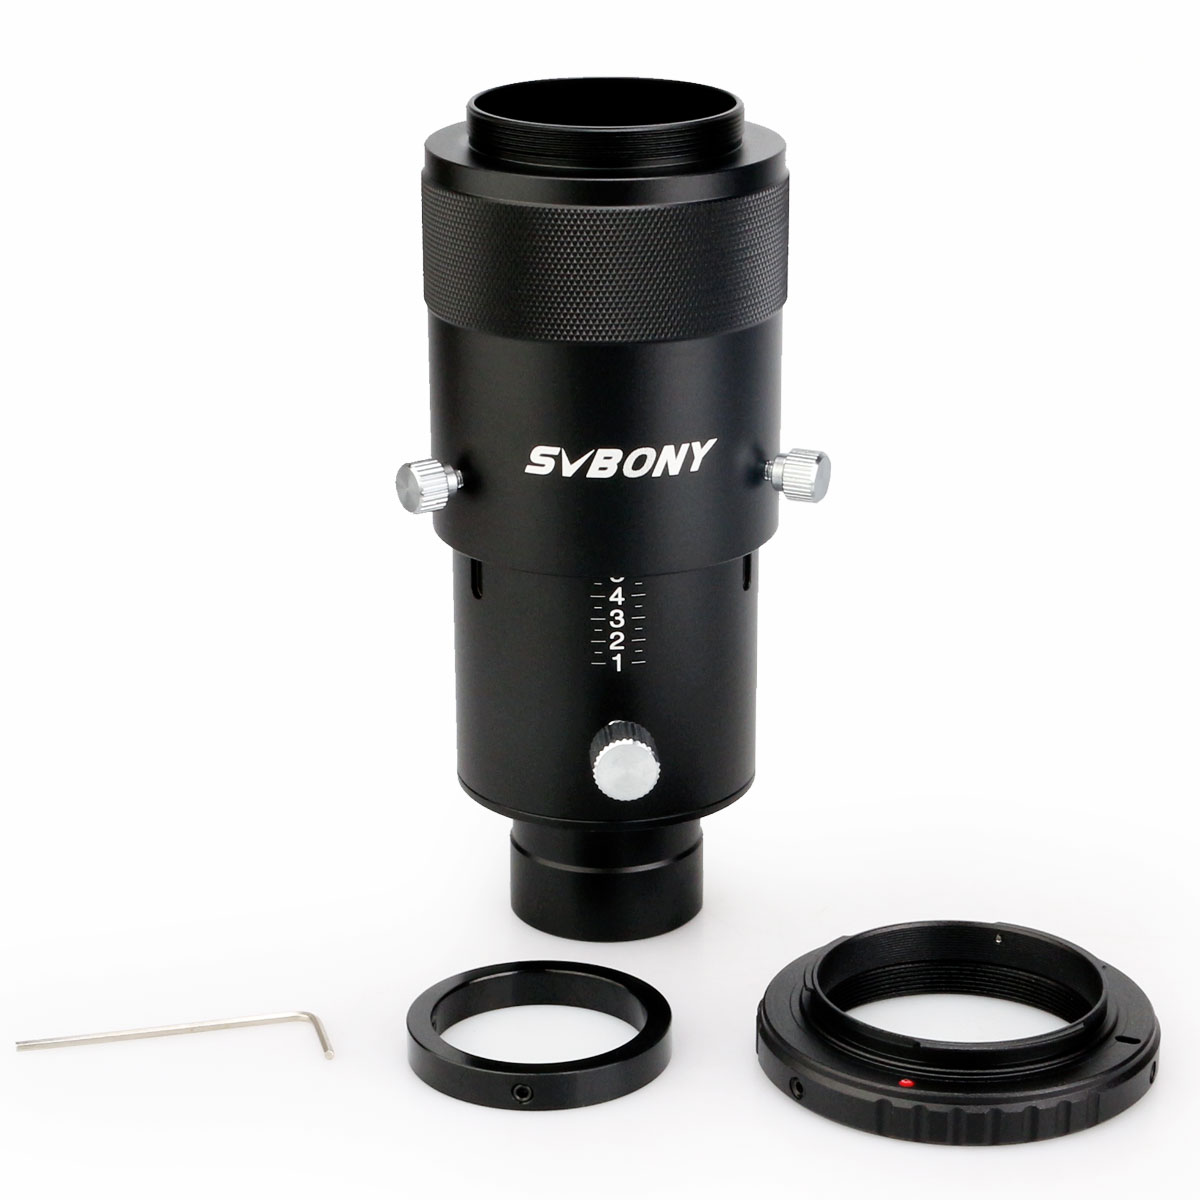 SVBONY-SV112-125quot-Fully-Metal-Deluxe-Variable-Eyepiece-Projection-Kit-for-Telescopes-with-T-Ring--1842642-1